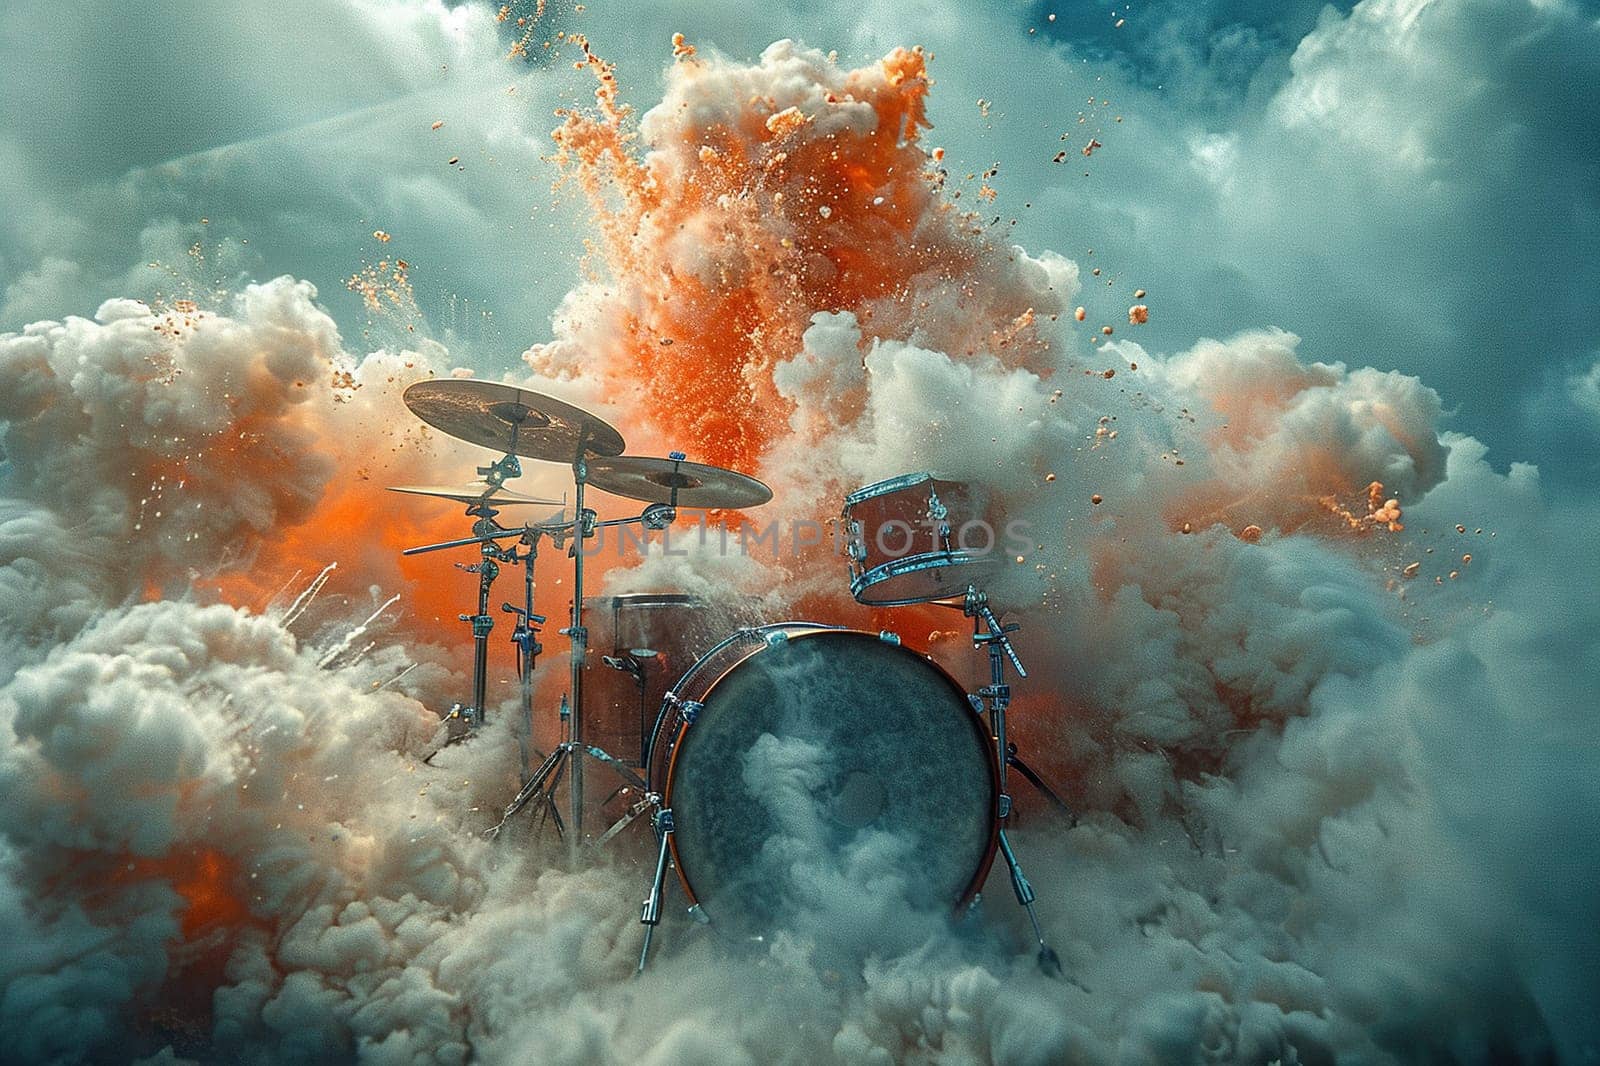 Drum set in puffs of smoke and clouds.